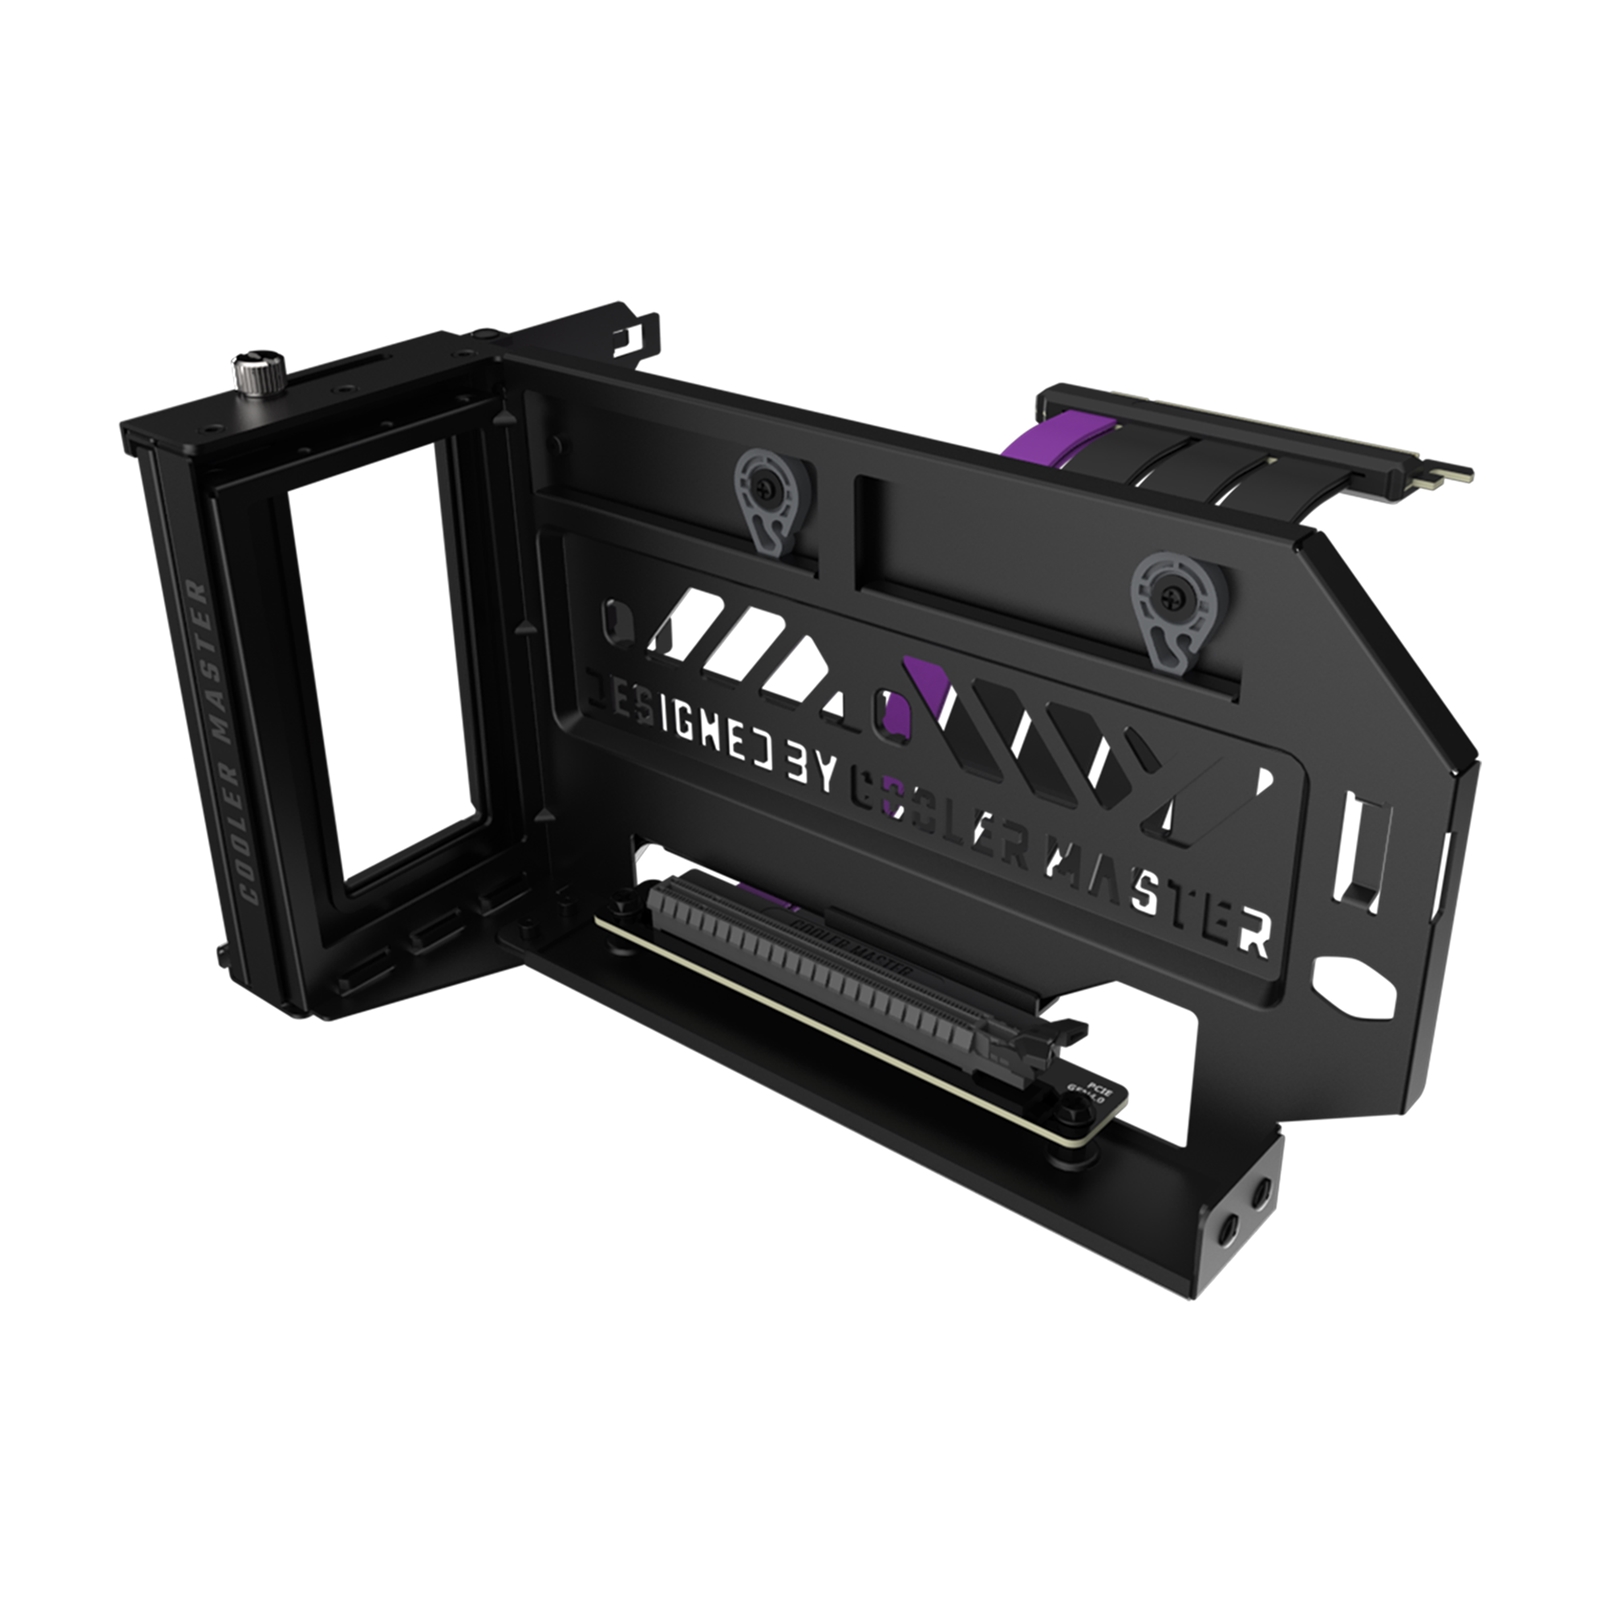 COOLER MASTER Vertical Graphics Card Holder Kit V3 Black Version, 165mm PCIe 4.0 x16 Riser Cable Included, Compatible with ATX & Micro ATX Cases, Toolless Adjustable Design, Premium Materials with 42% Increased Durability